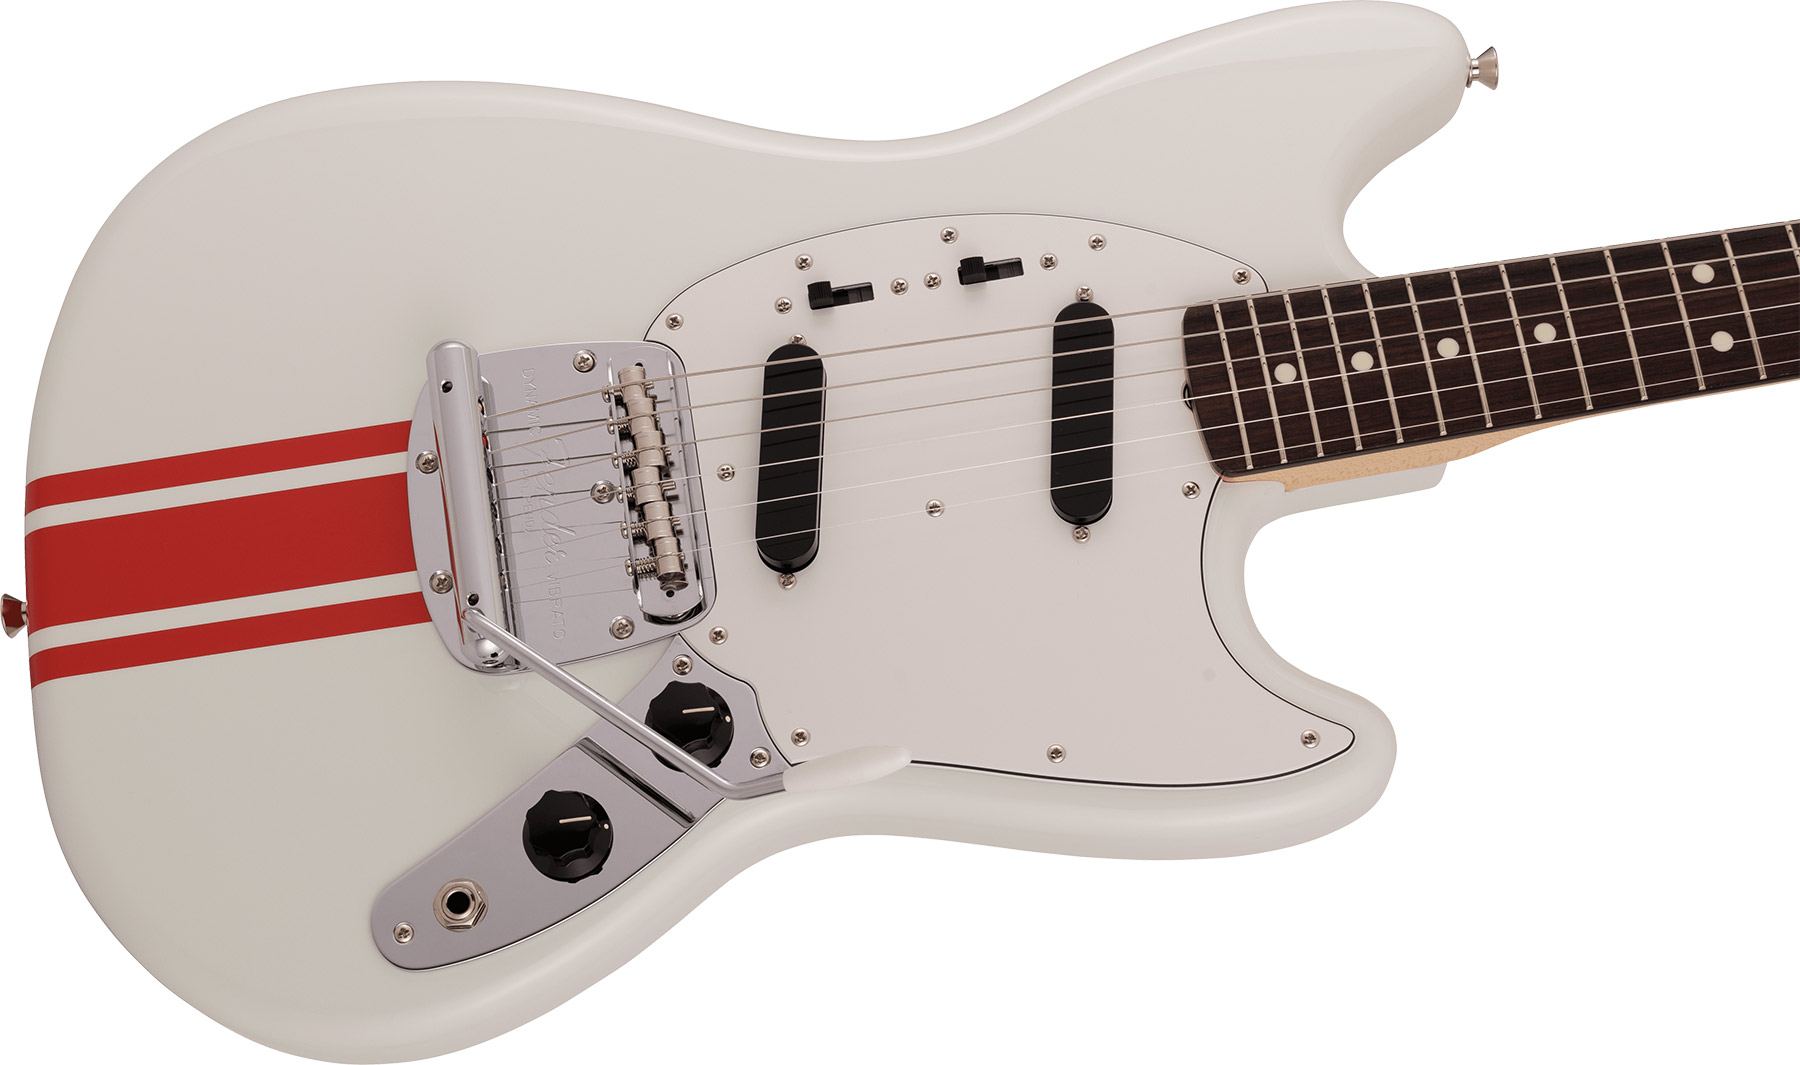 Fender Mustang Traditional 60s Mij Jap 2s Trem Rw - Olympic White W/ Red Competition Stripe - Retro-Rock-E-Gitarre - Variation 2